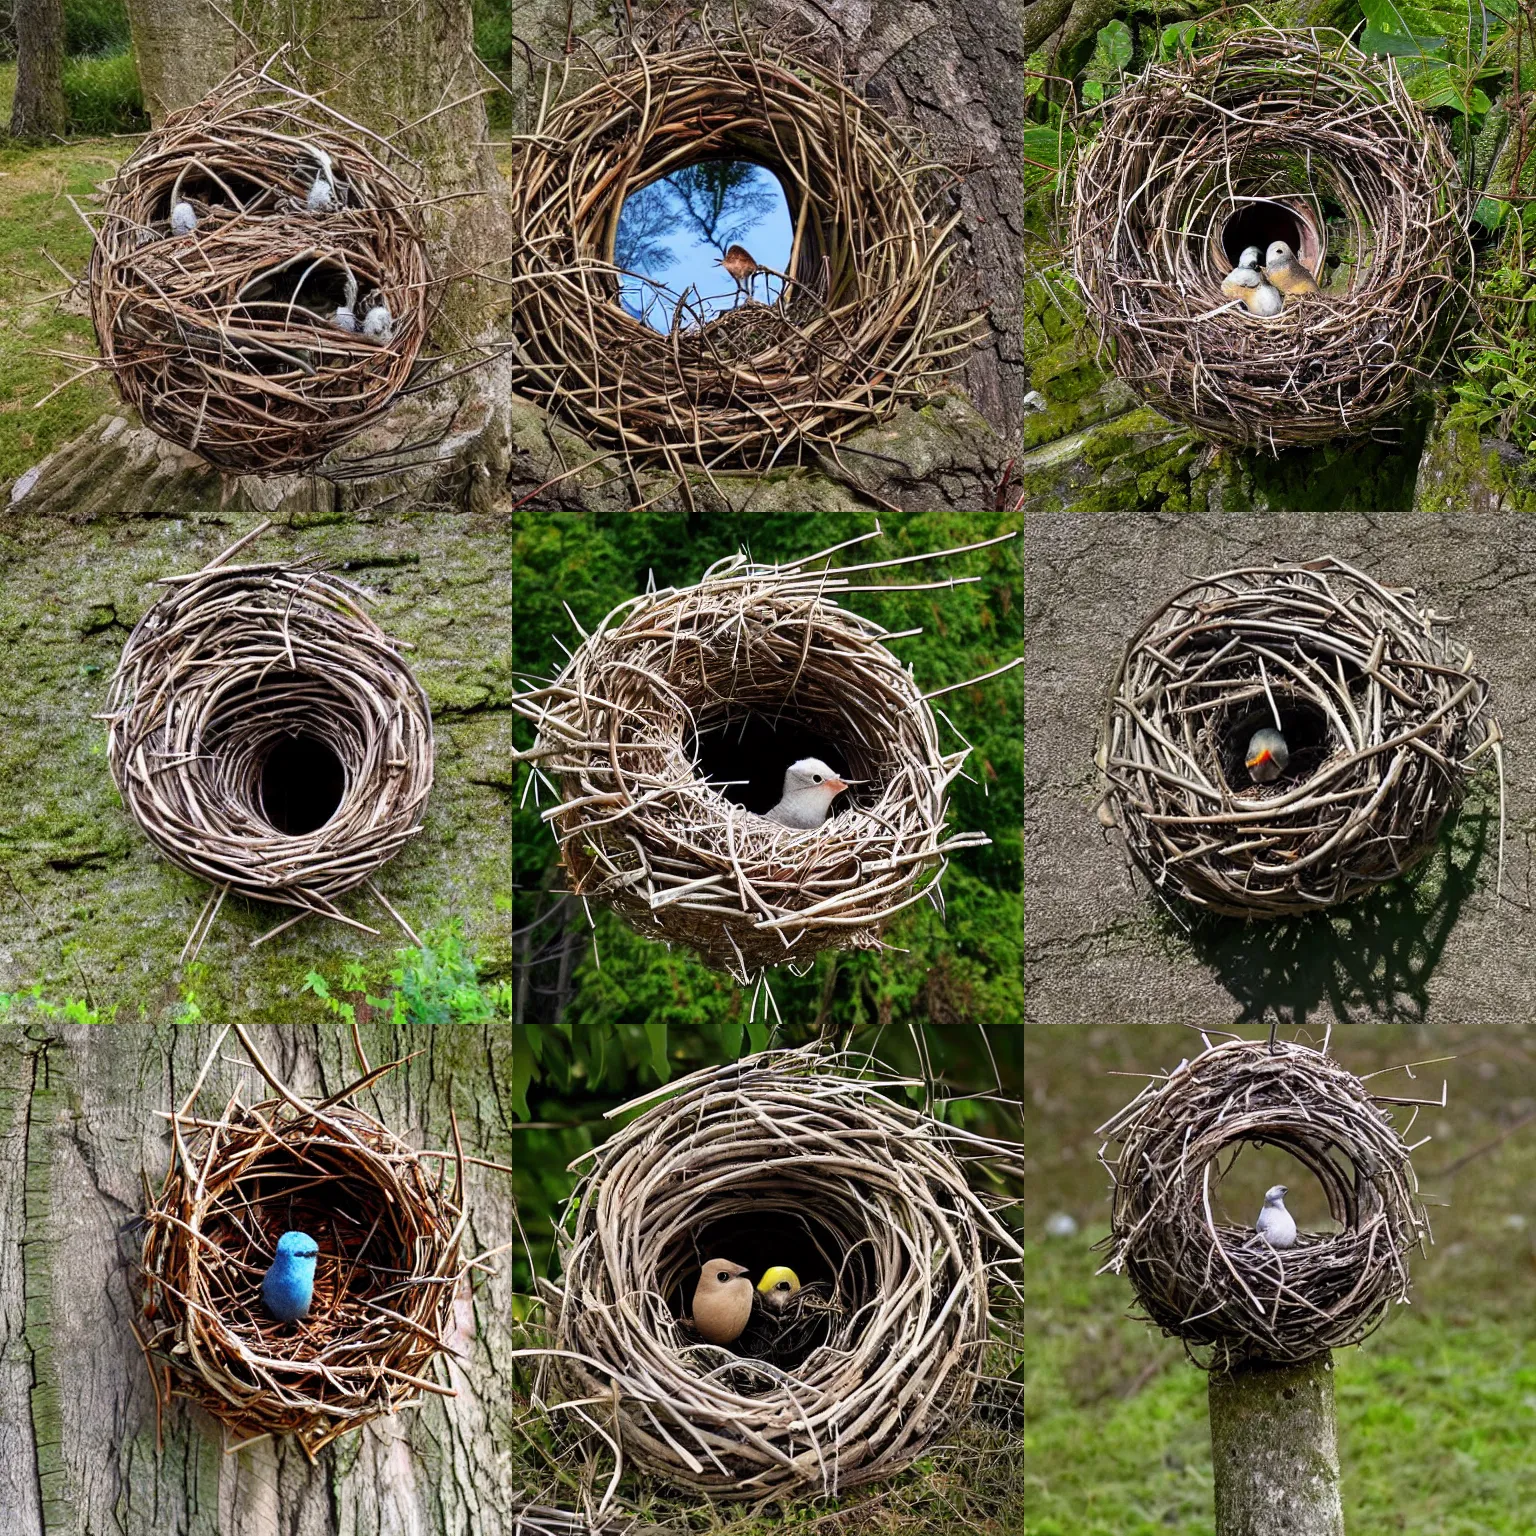 Prompt: Bird nesting in an environment art sculpture by Nils-Udo, leaves twigs wood, nature, natural, round form, Bird inside, leaf spiral pattern around outside of structure